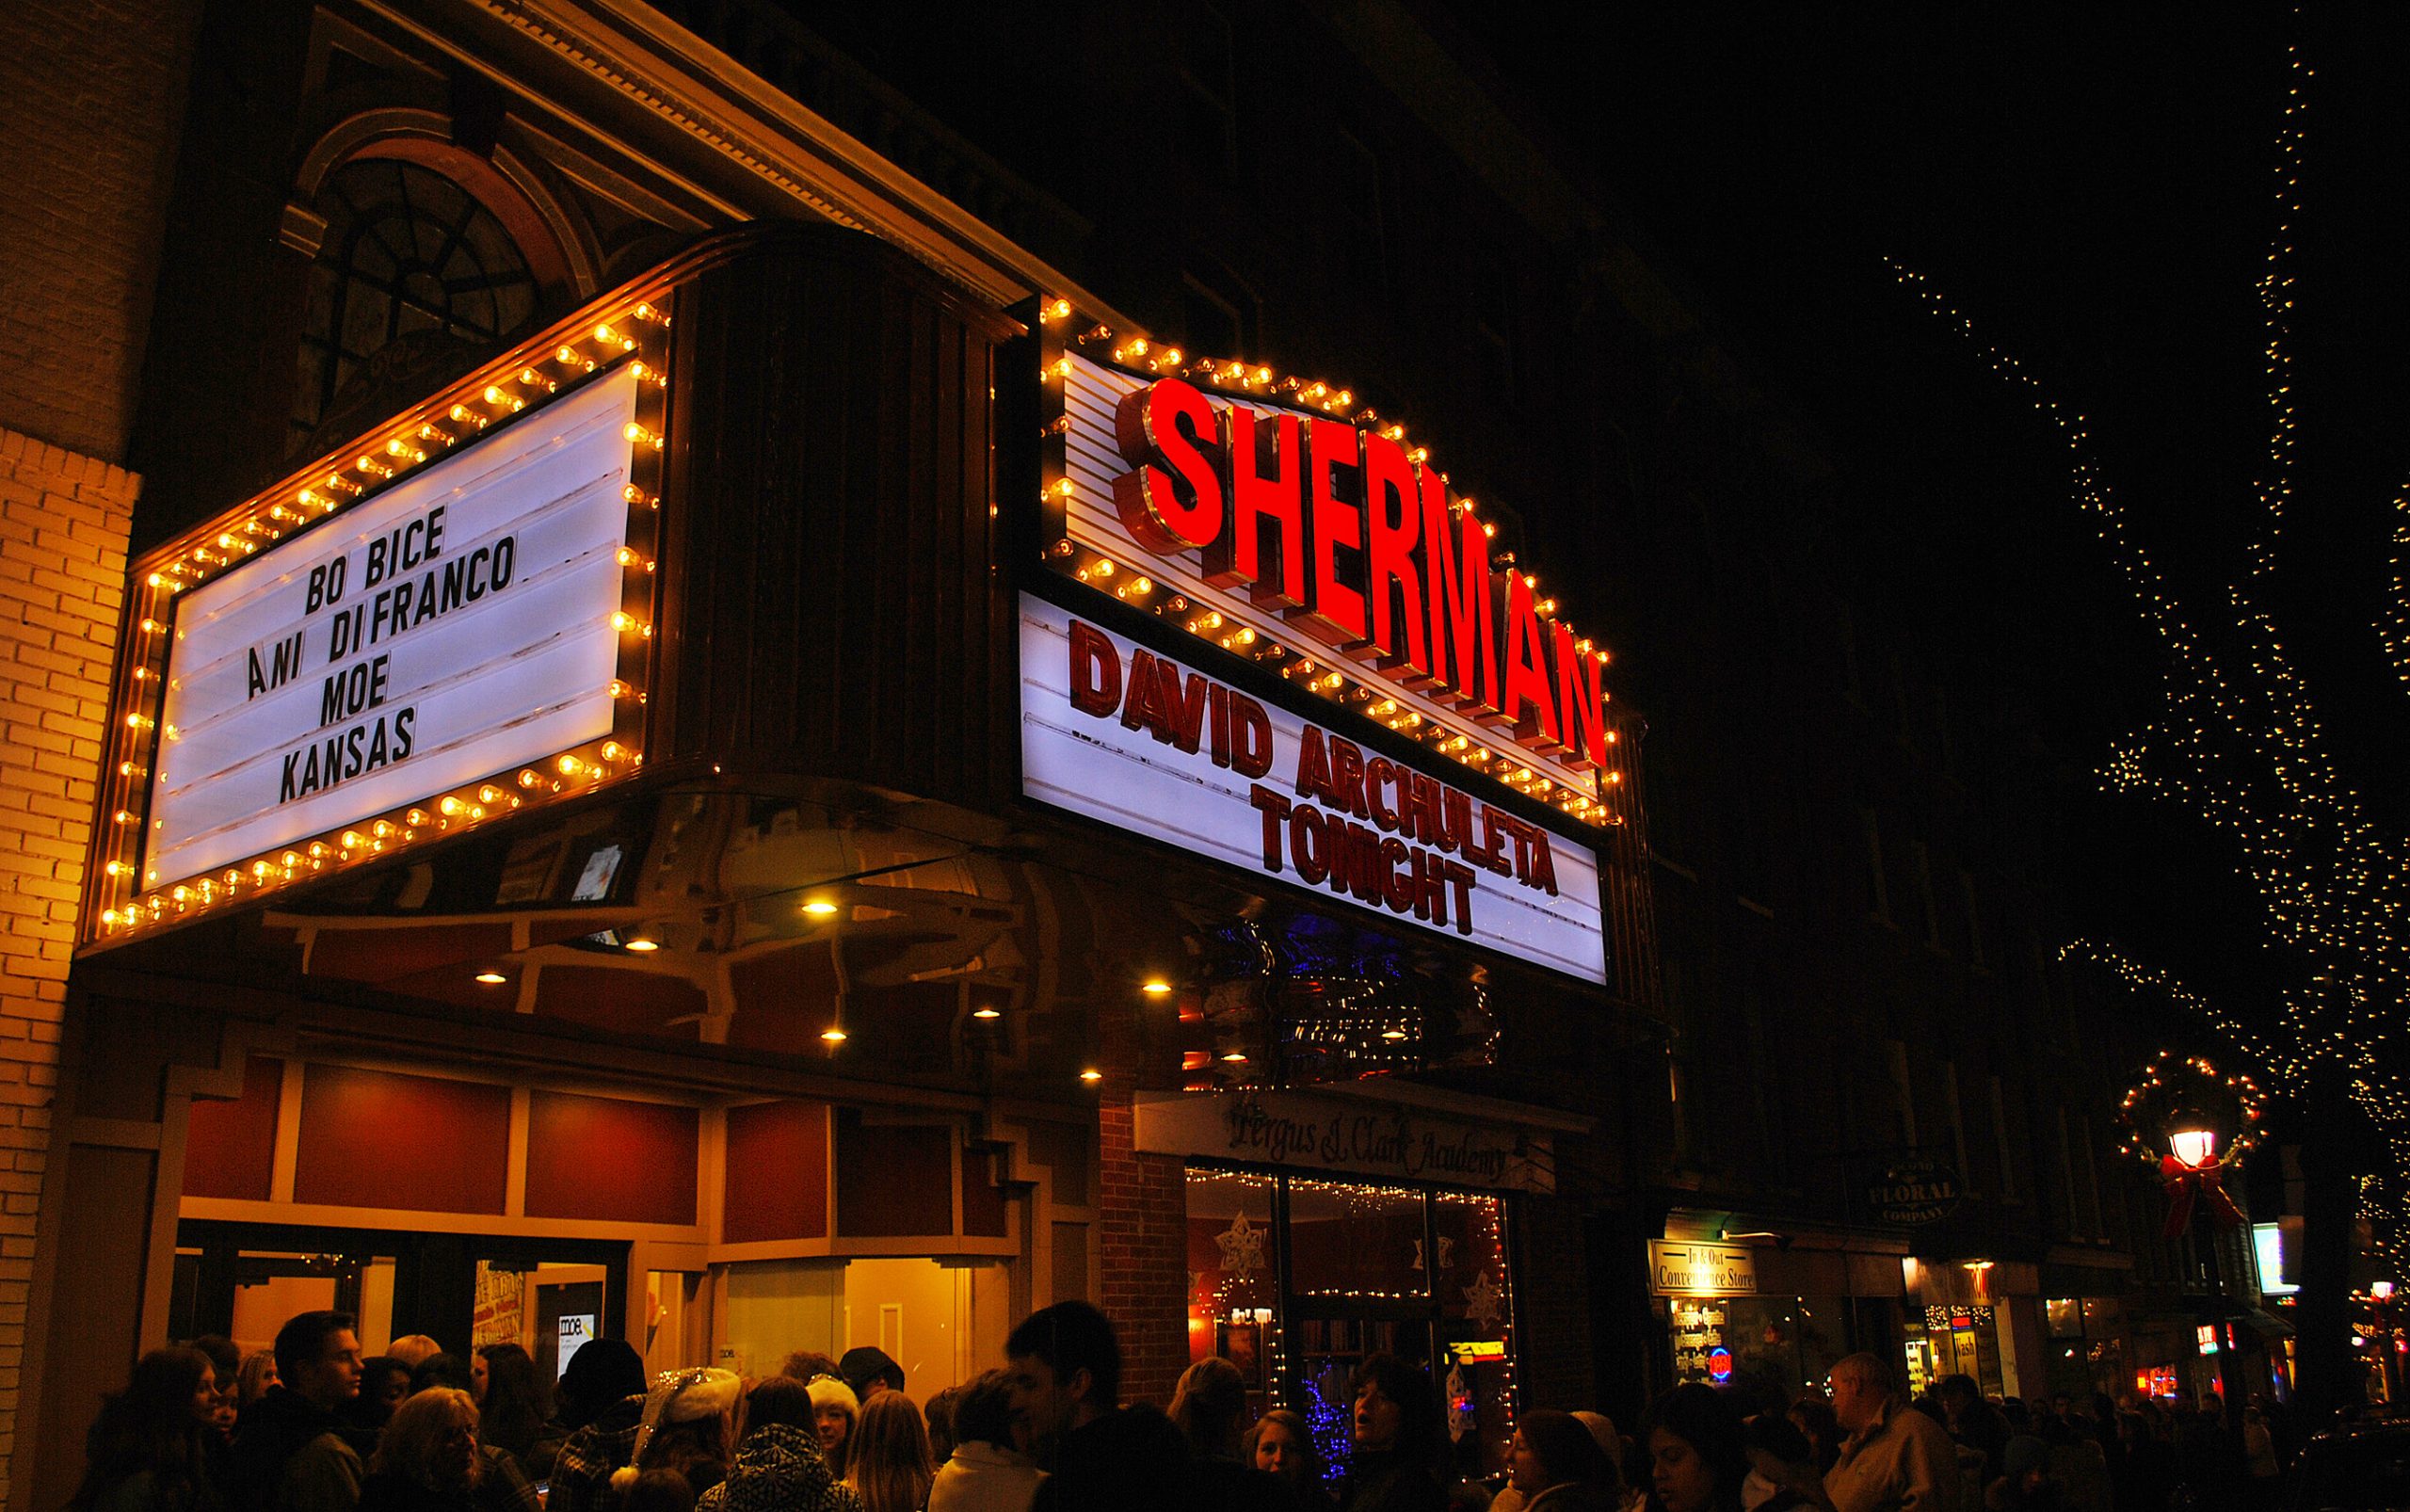 The Sherman Theater in Stroudsburg pic